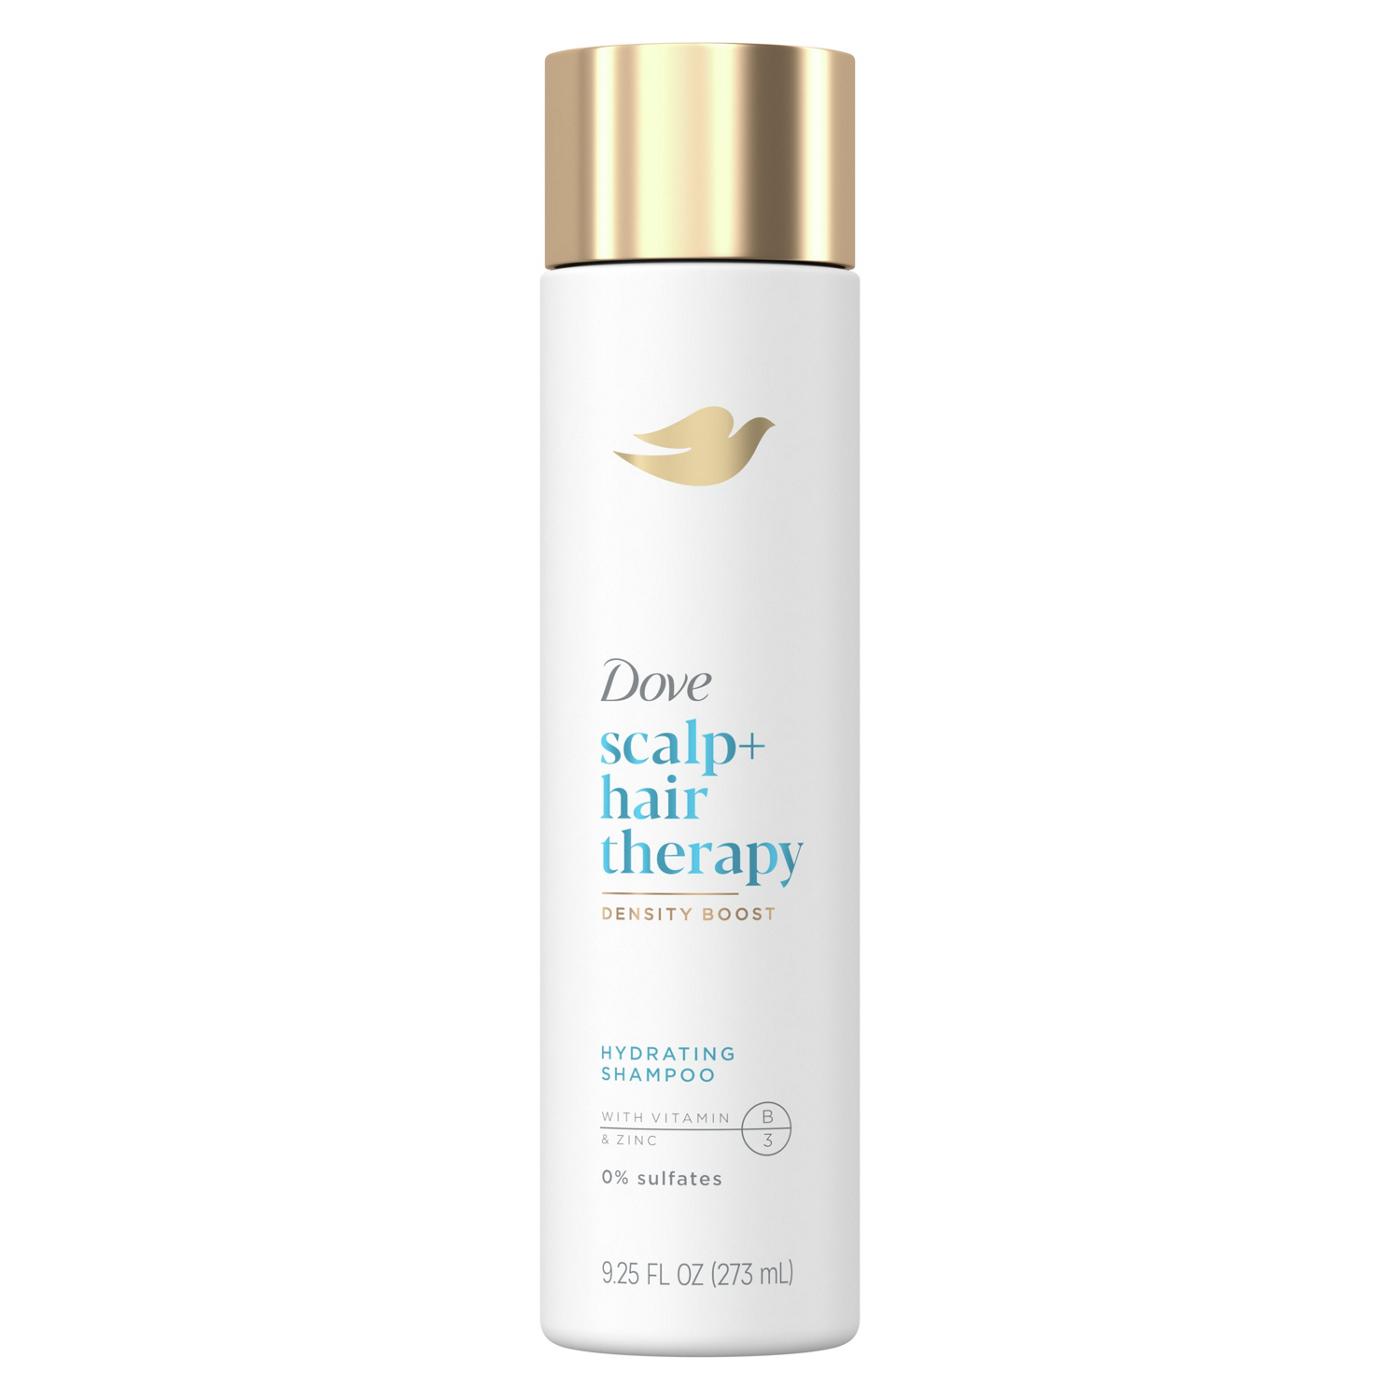 Dove Scalp+ Hair Therapy Hydrating Shampoo; image 1 of 4